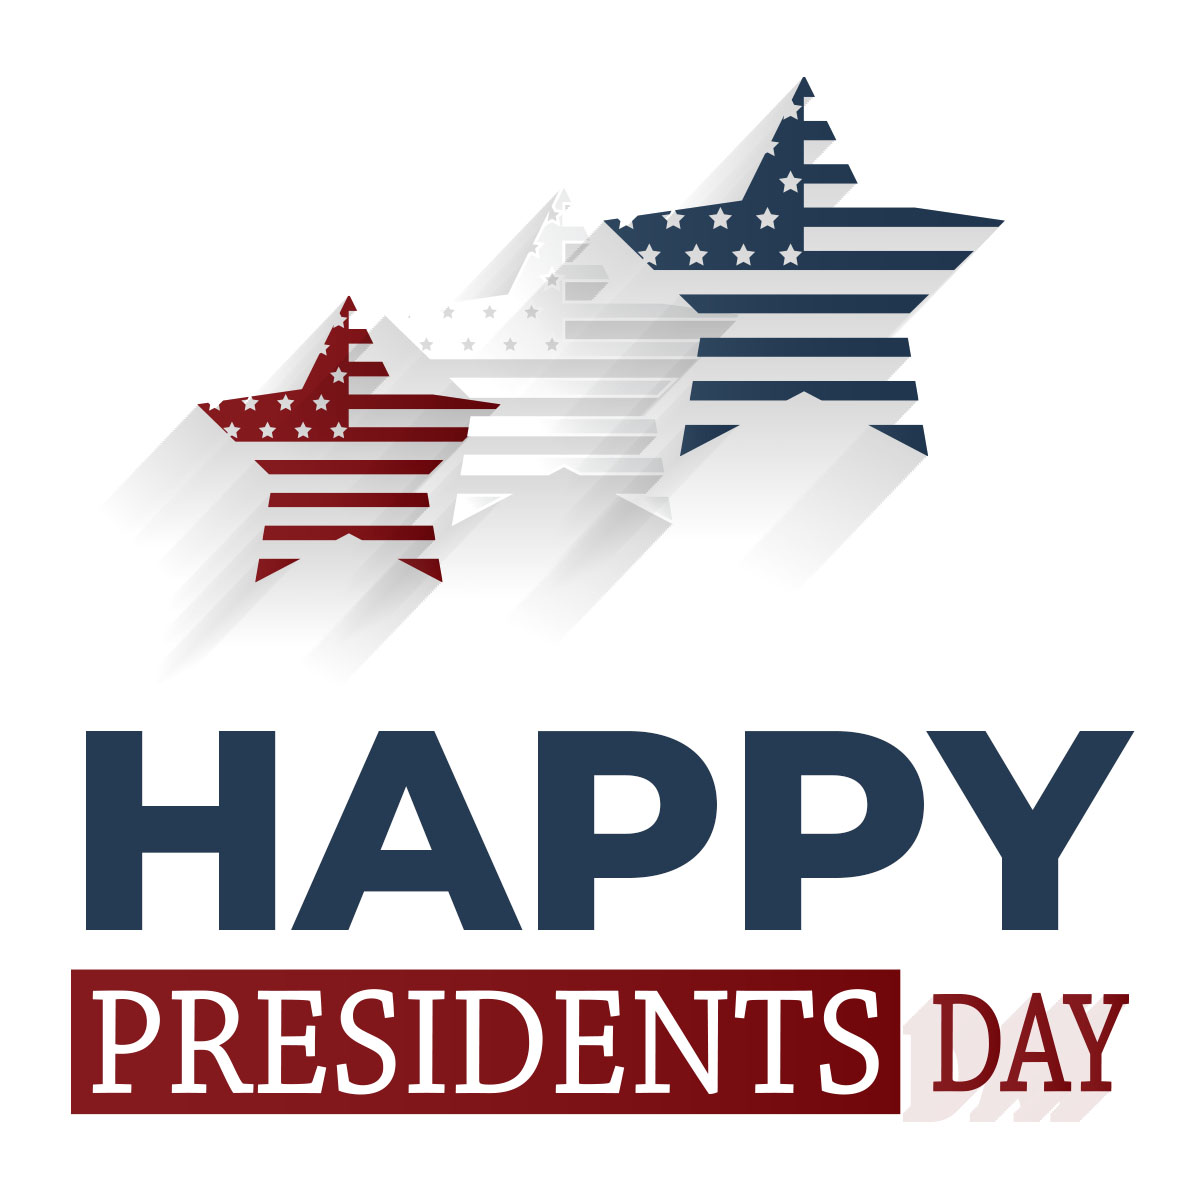 Today, we honor our past leaders and their impact on our nation. But, let's not forget the impact of technology - without it, we'd still be sending presidential updates via carrier pigeon! #PresidentsDay #TechSavvy